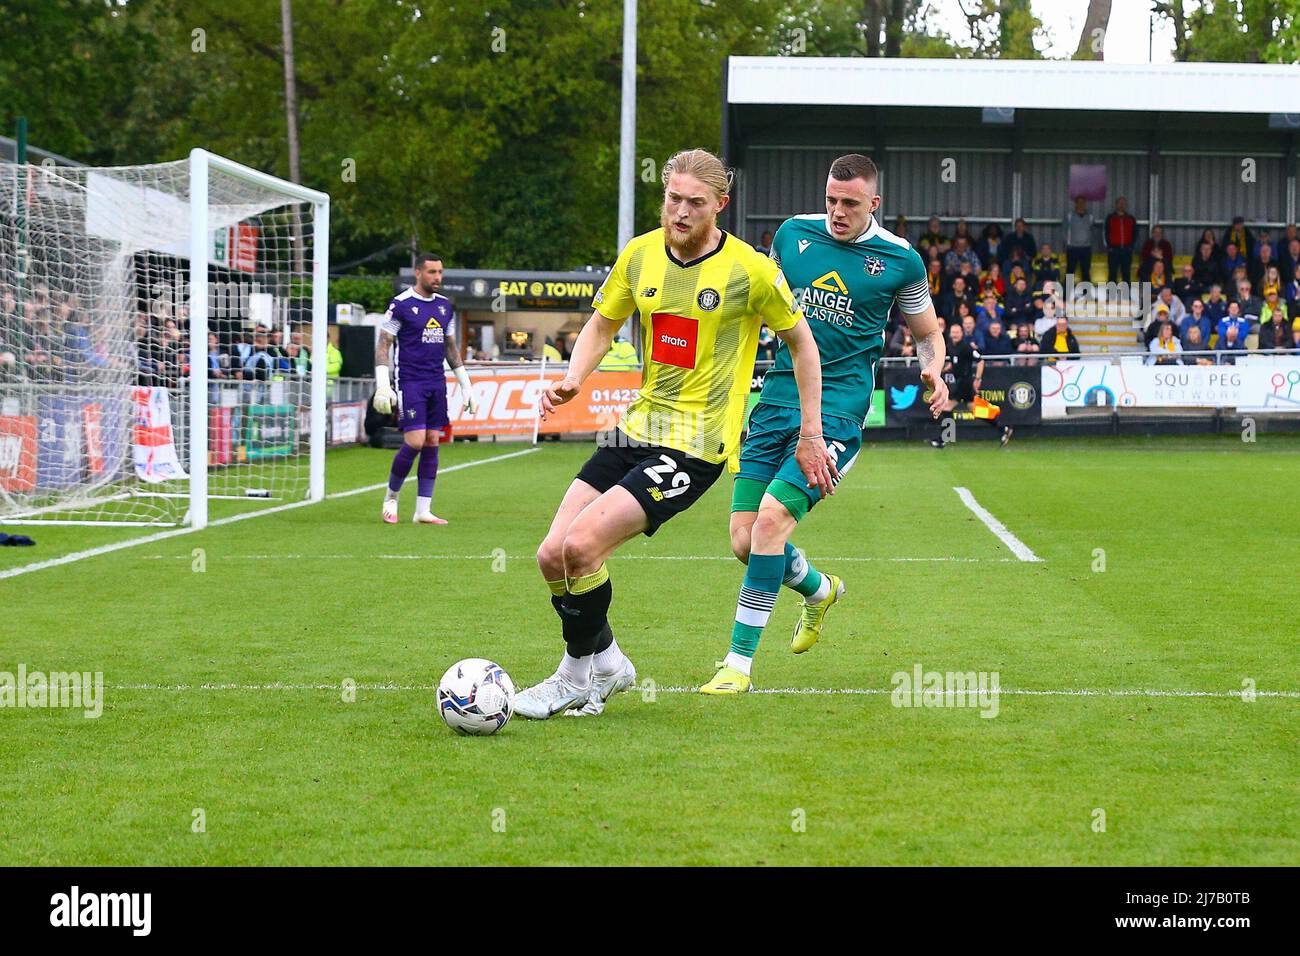 The EnviroVent Stadium, Harrogate, England - 7th May 2022 Luke Armstrong (29) of Harrogate shields the ball from Ben Goodliffe (5) of Sutton United - during the game Harrogate v Sutton, EFL League 2, 2021/22, at The EnviroVent Stadium, Harrogate, England - 7th May 2022  Credit: Arthur Haigh/WhiteRosePhotos/Alamy Live News Stock Photo